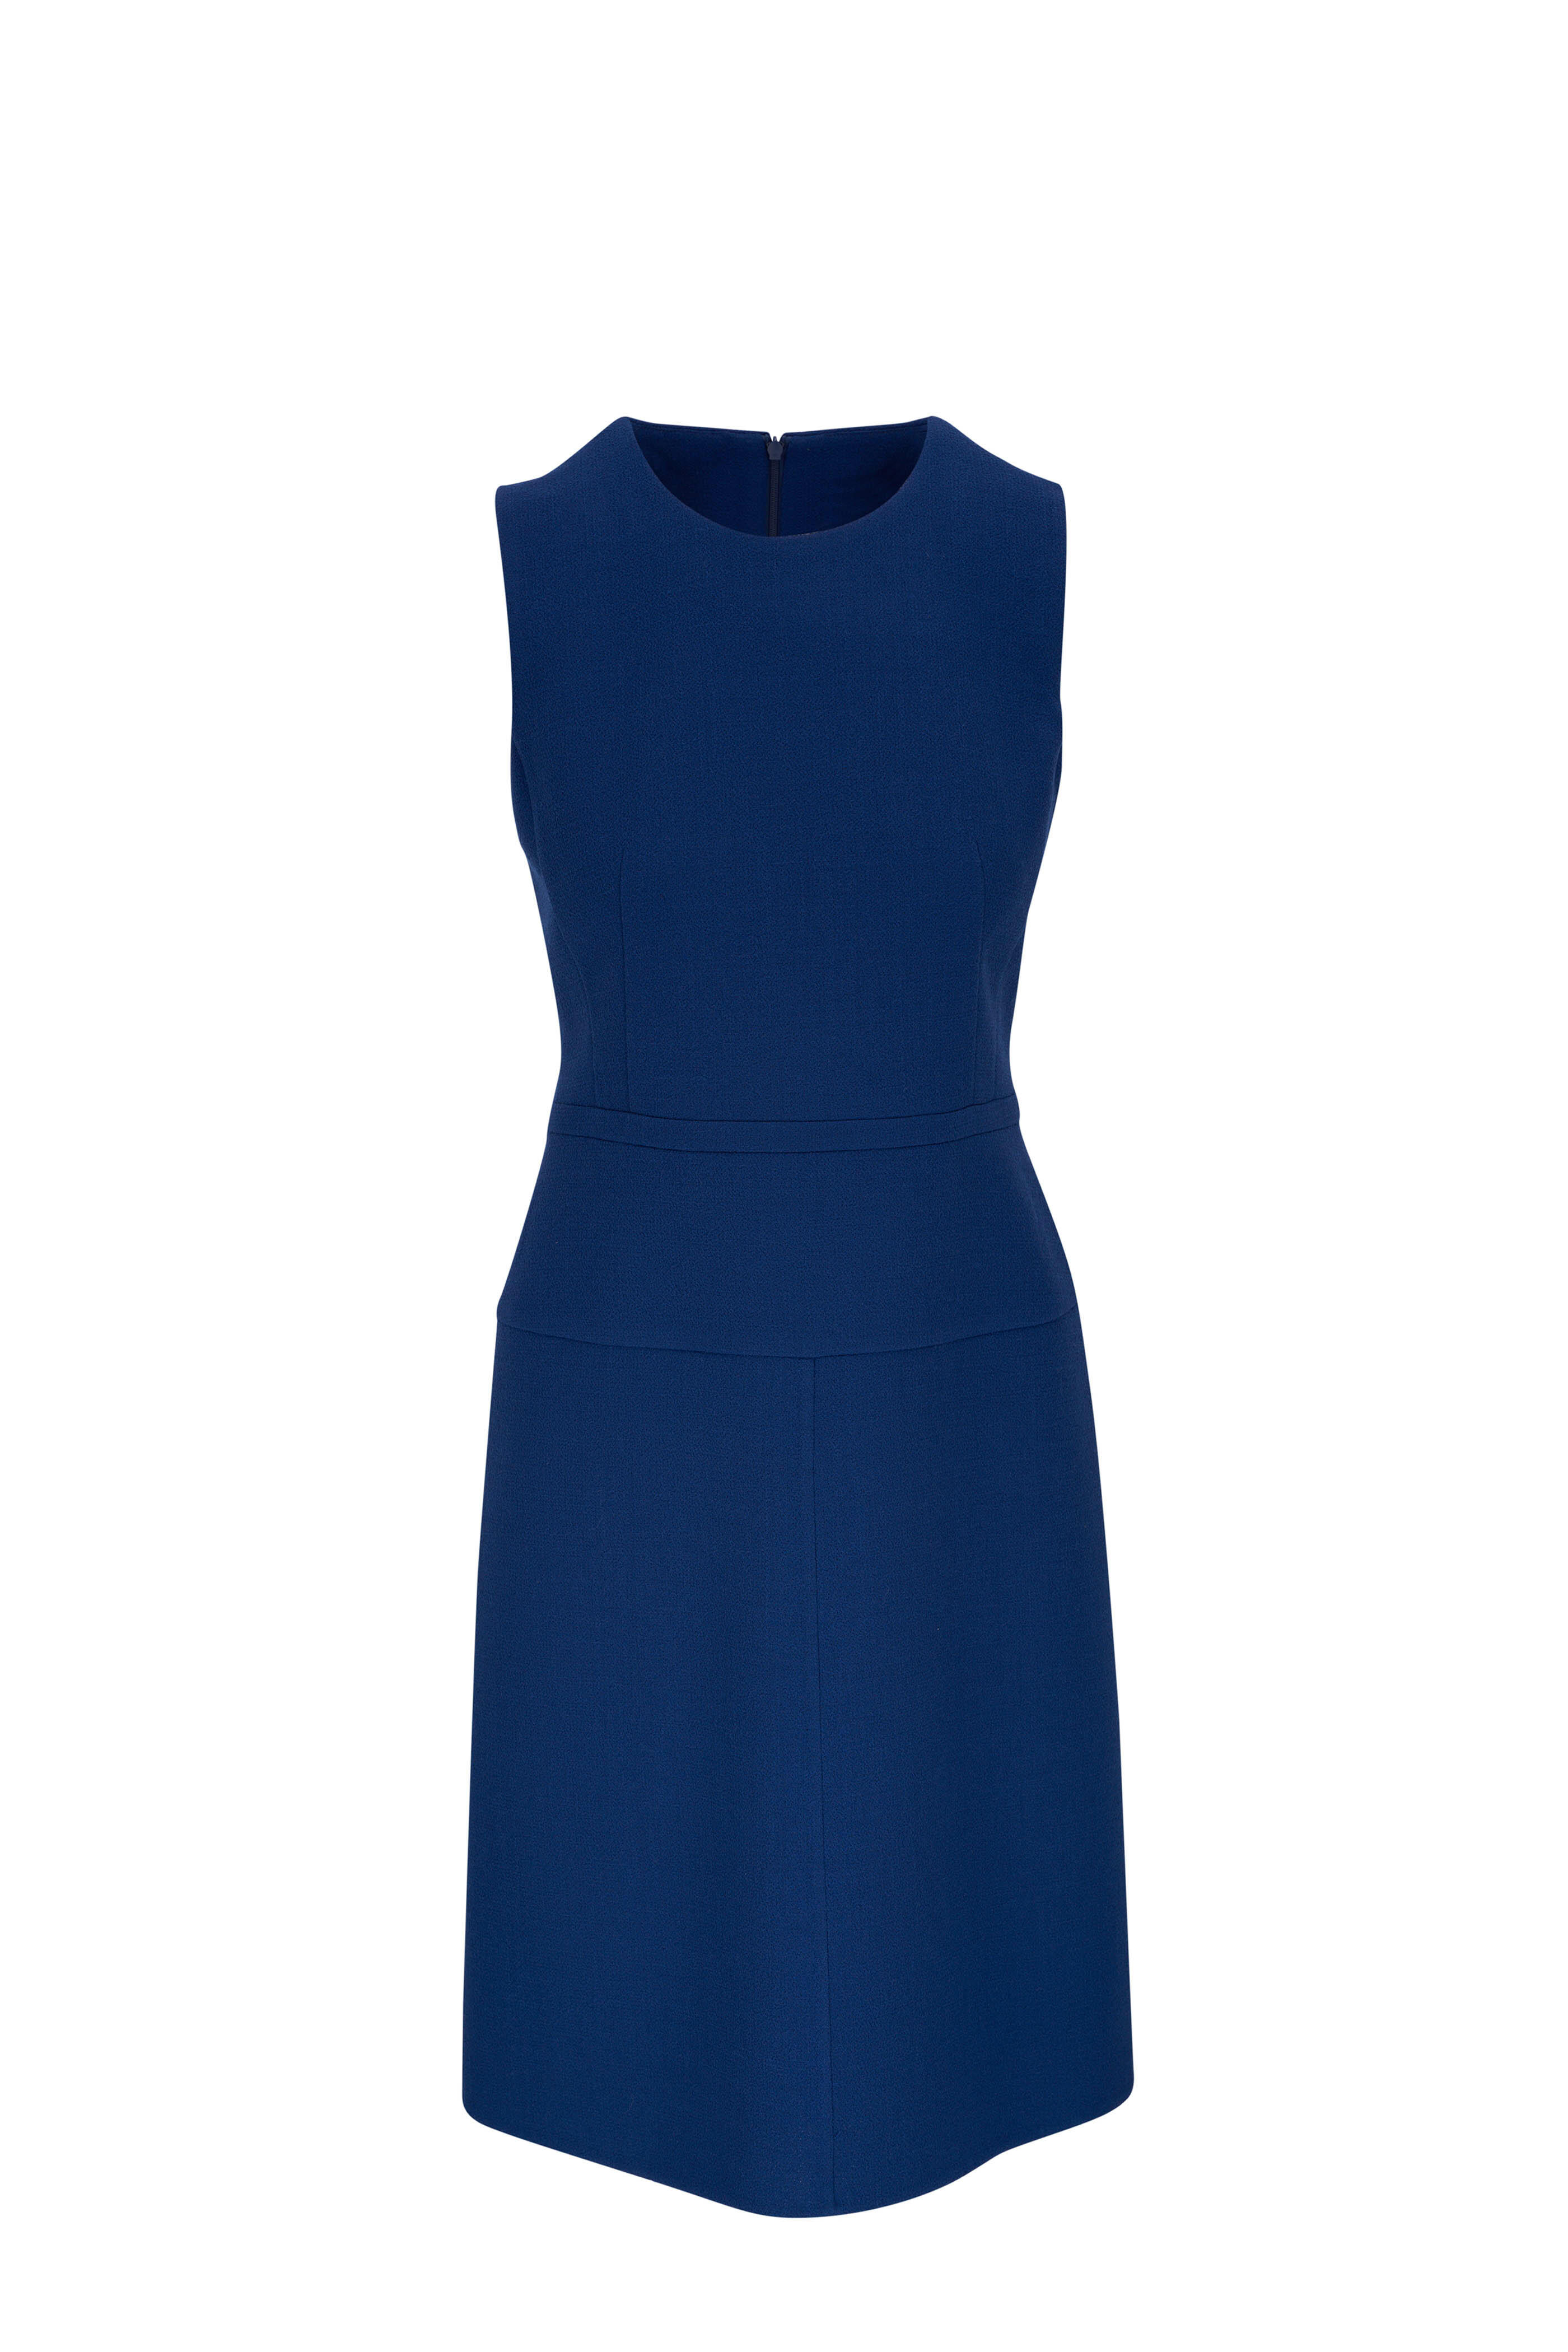 Akris - Ink Blue Wool Crepe Shift Dress | Mitchell Stores